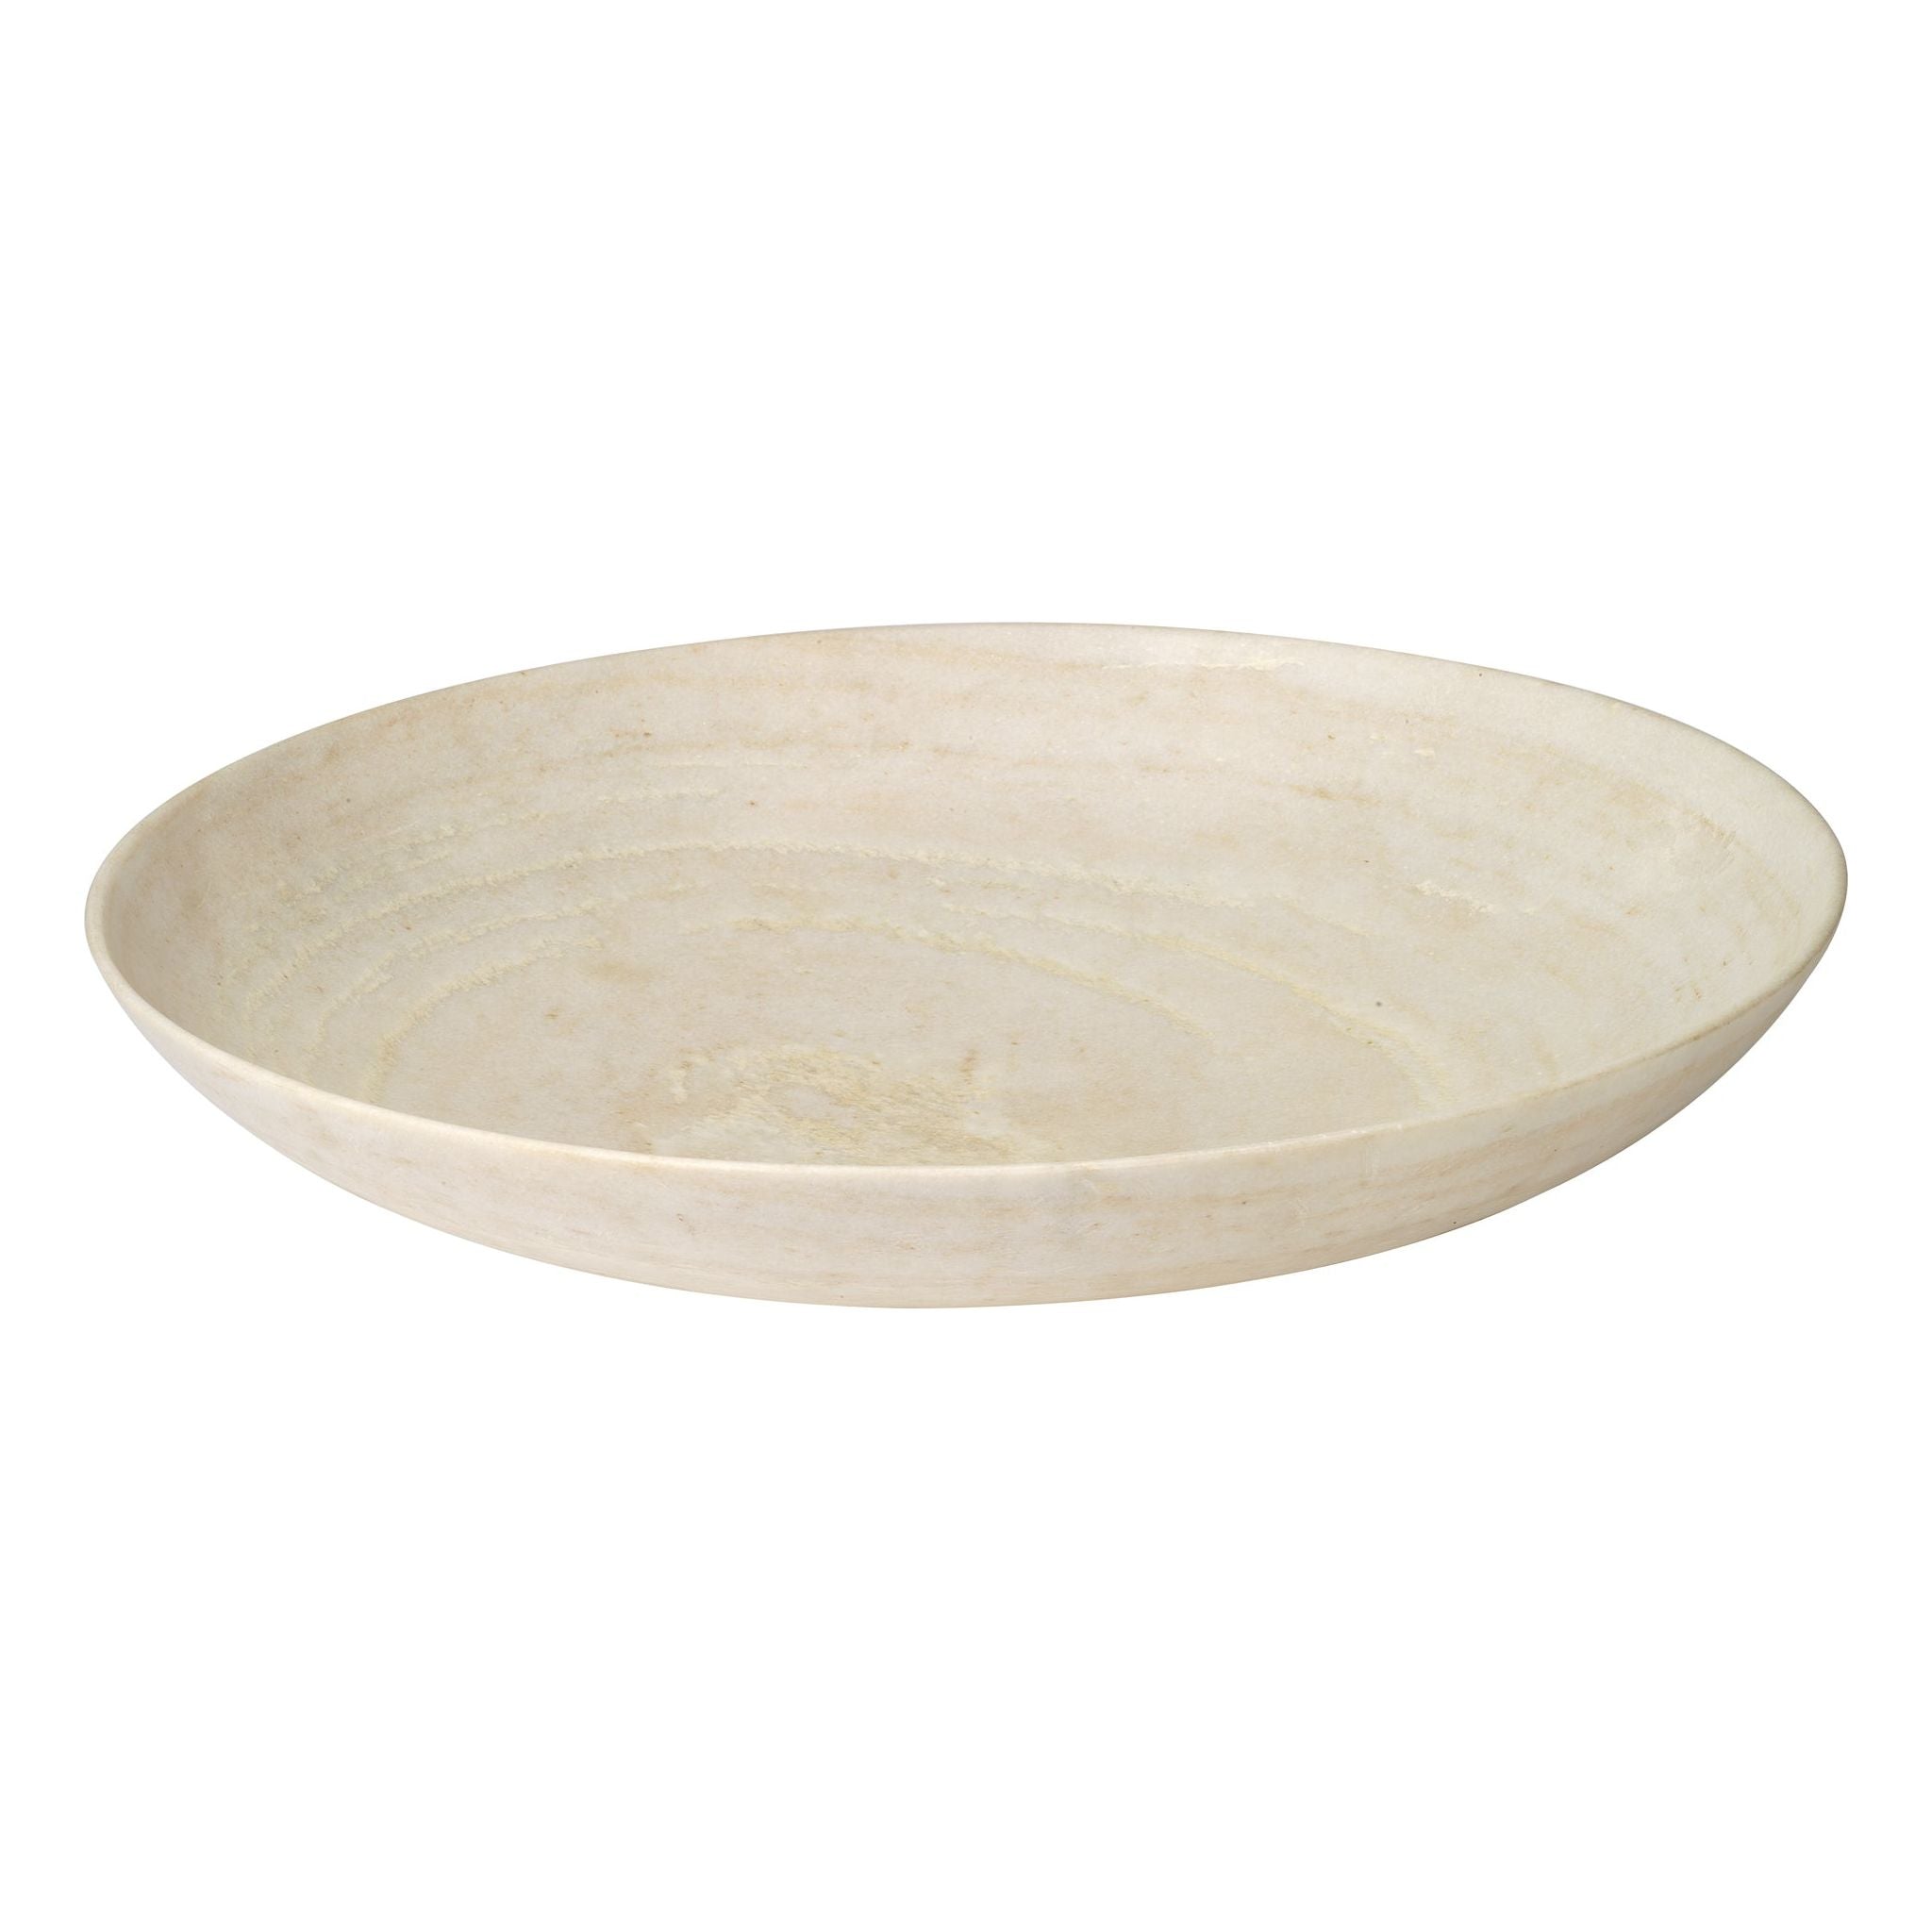 Jamie Young Company - 7MARB-XLWH - Marble Bowl - Marble - White